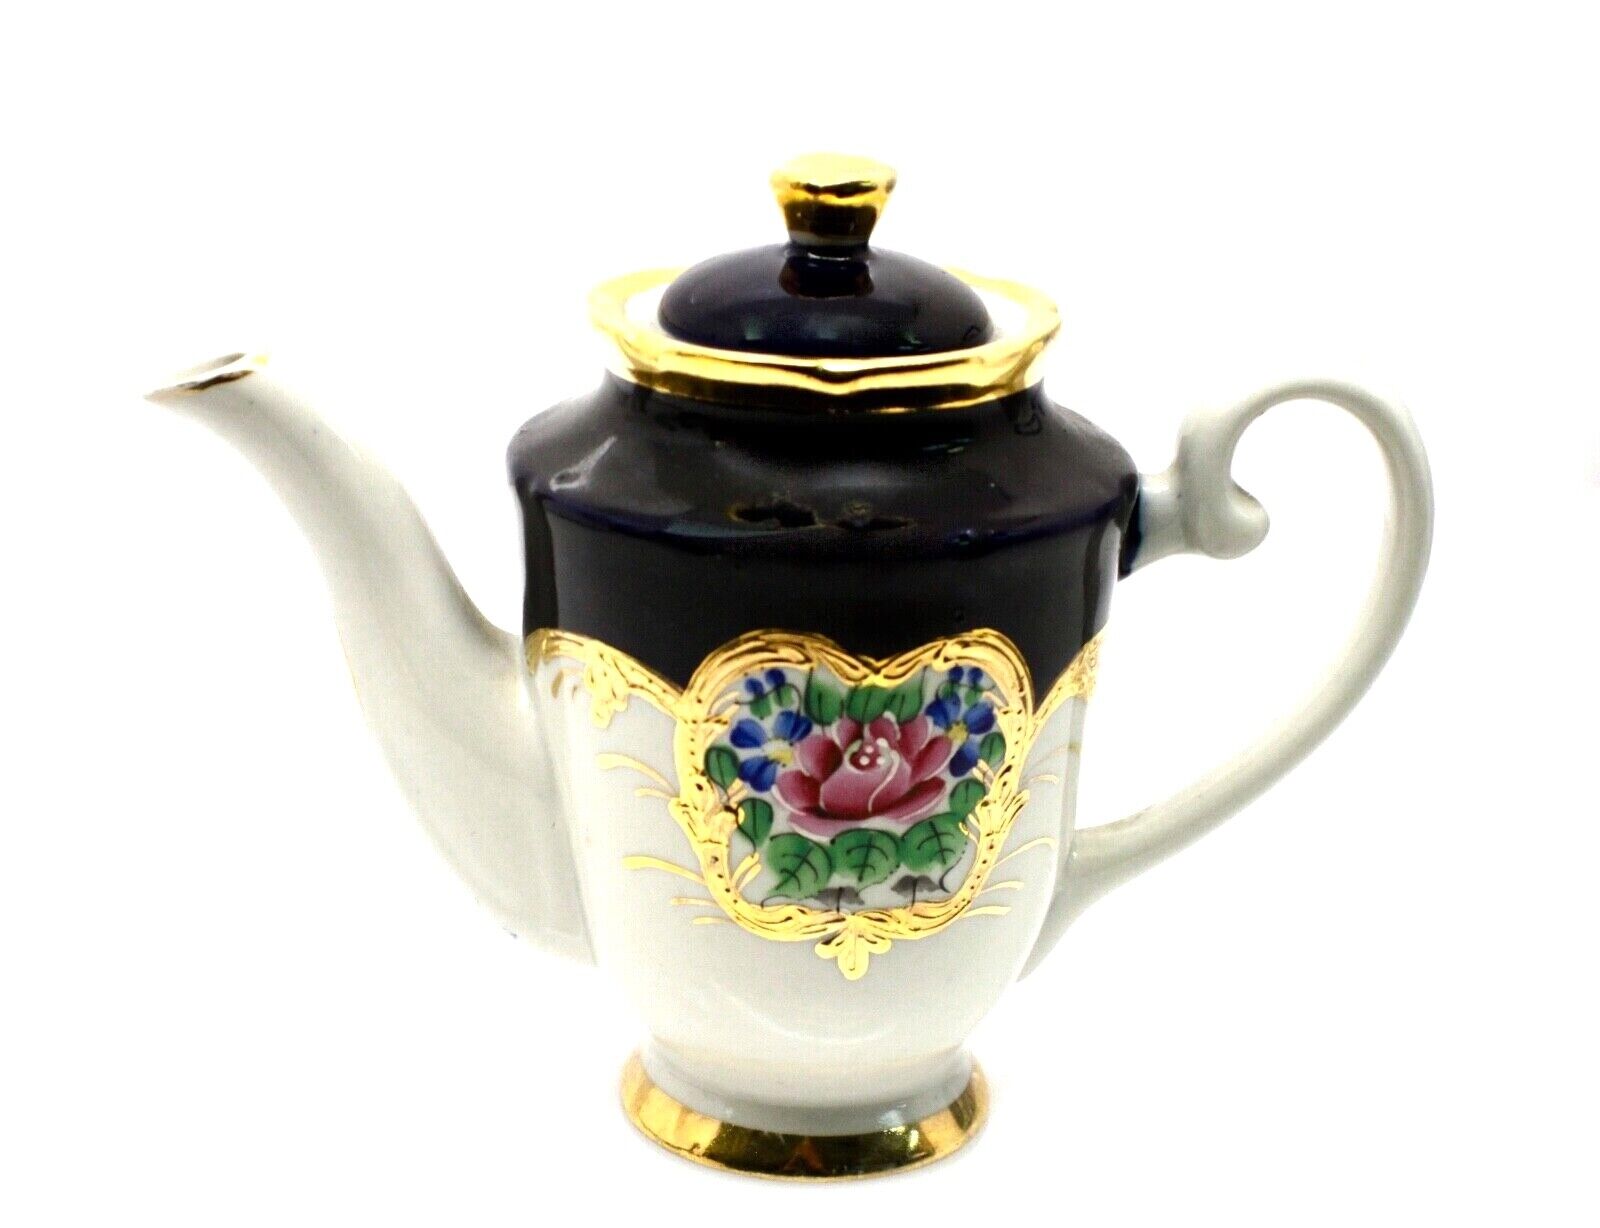 English  Ceramic Teapot With Gold and Enamel Decoration